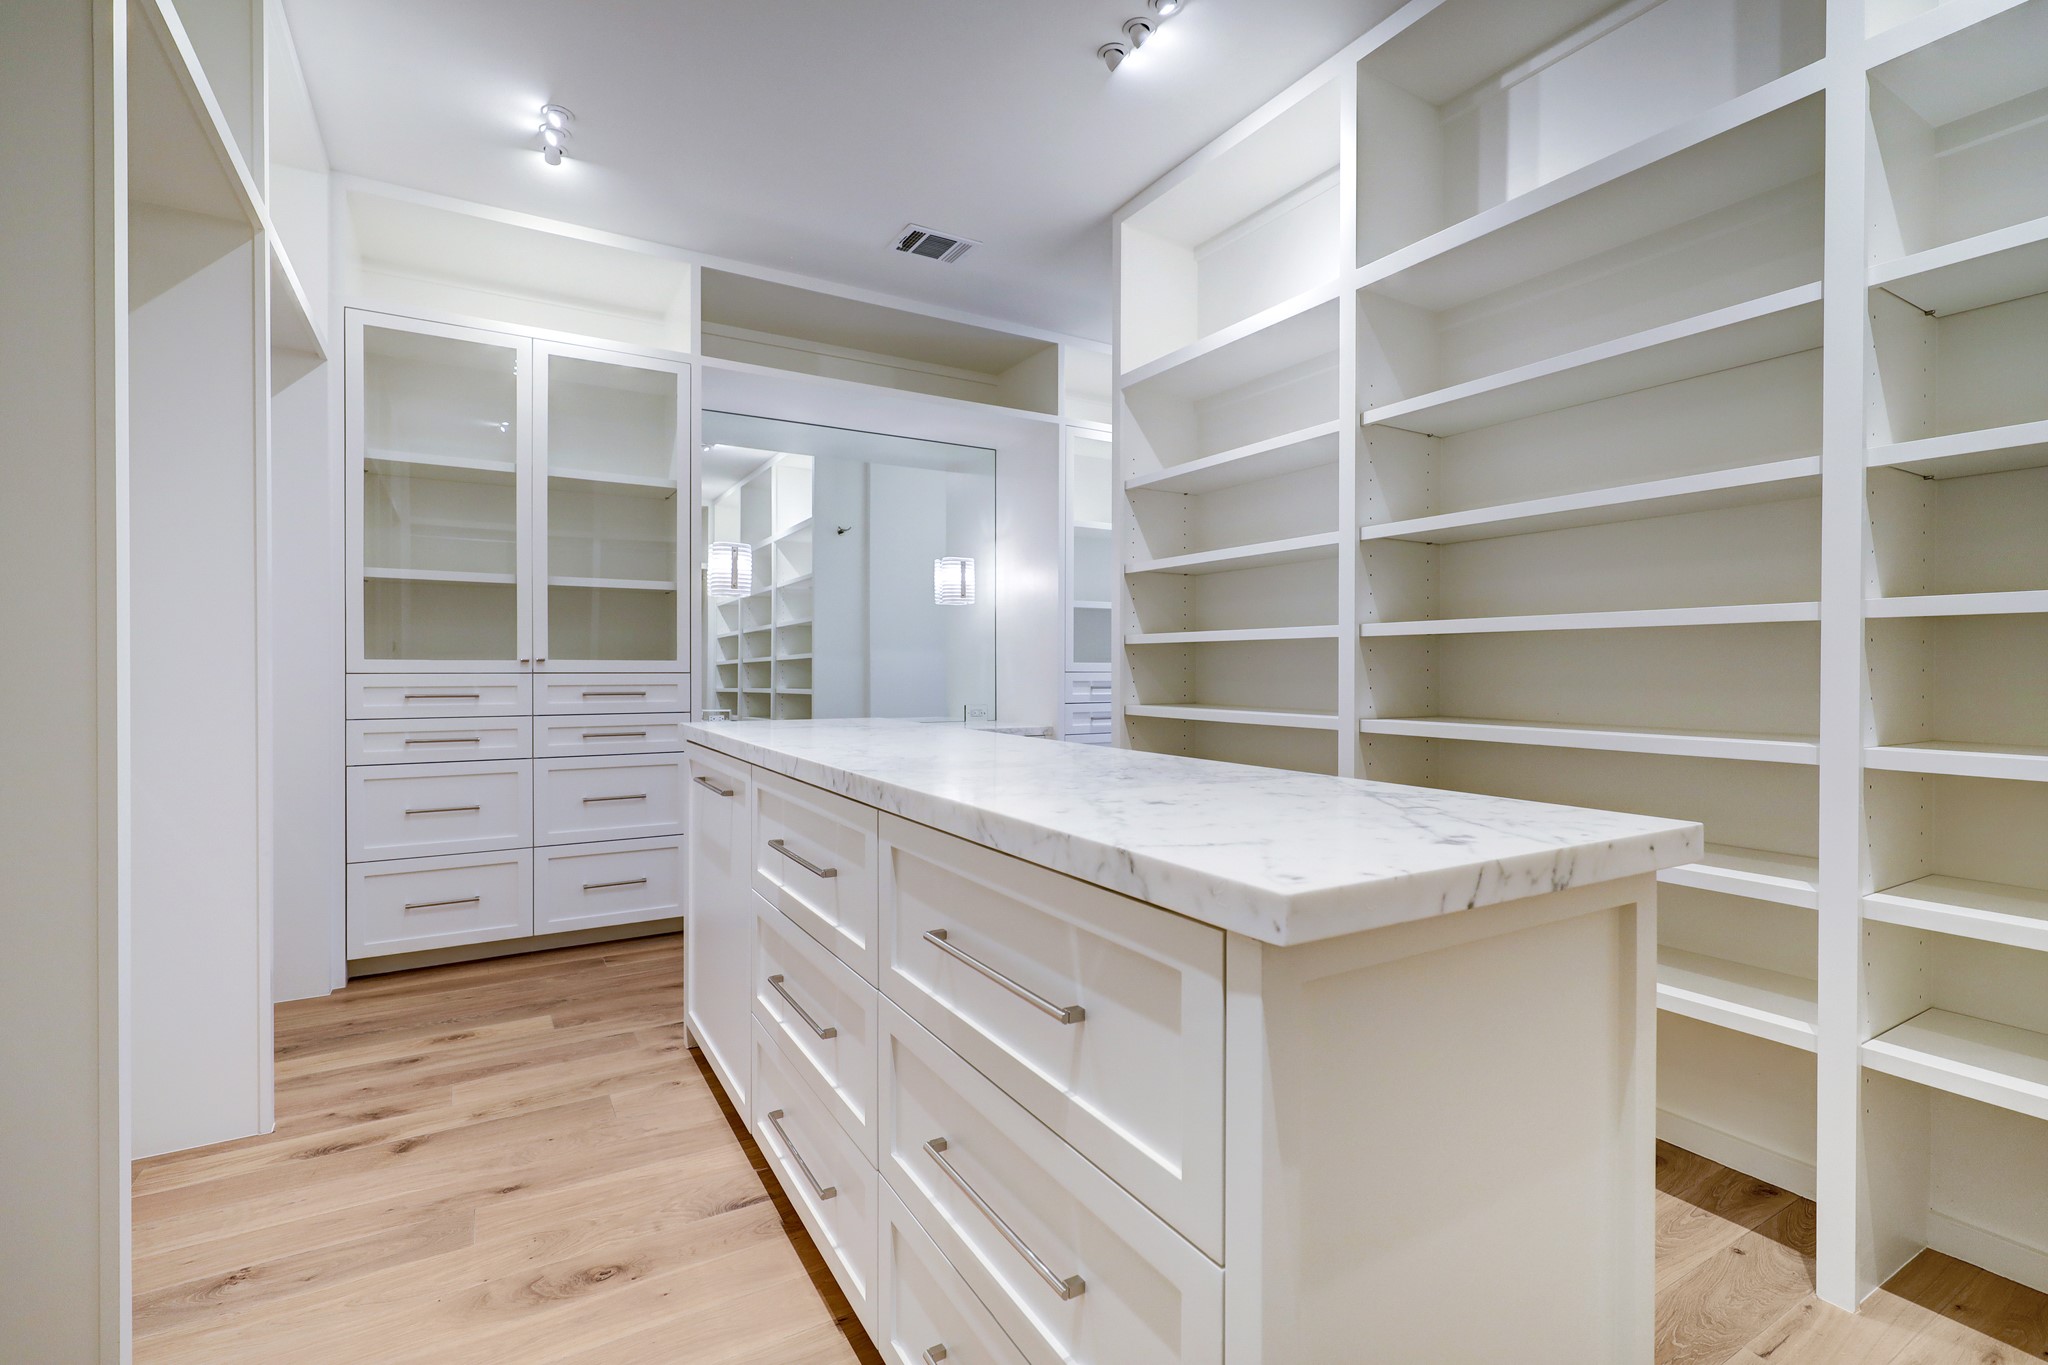 An alternative perspective of the second dressing room unveils a custom vanity separate from the primary bathroom.